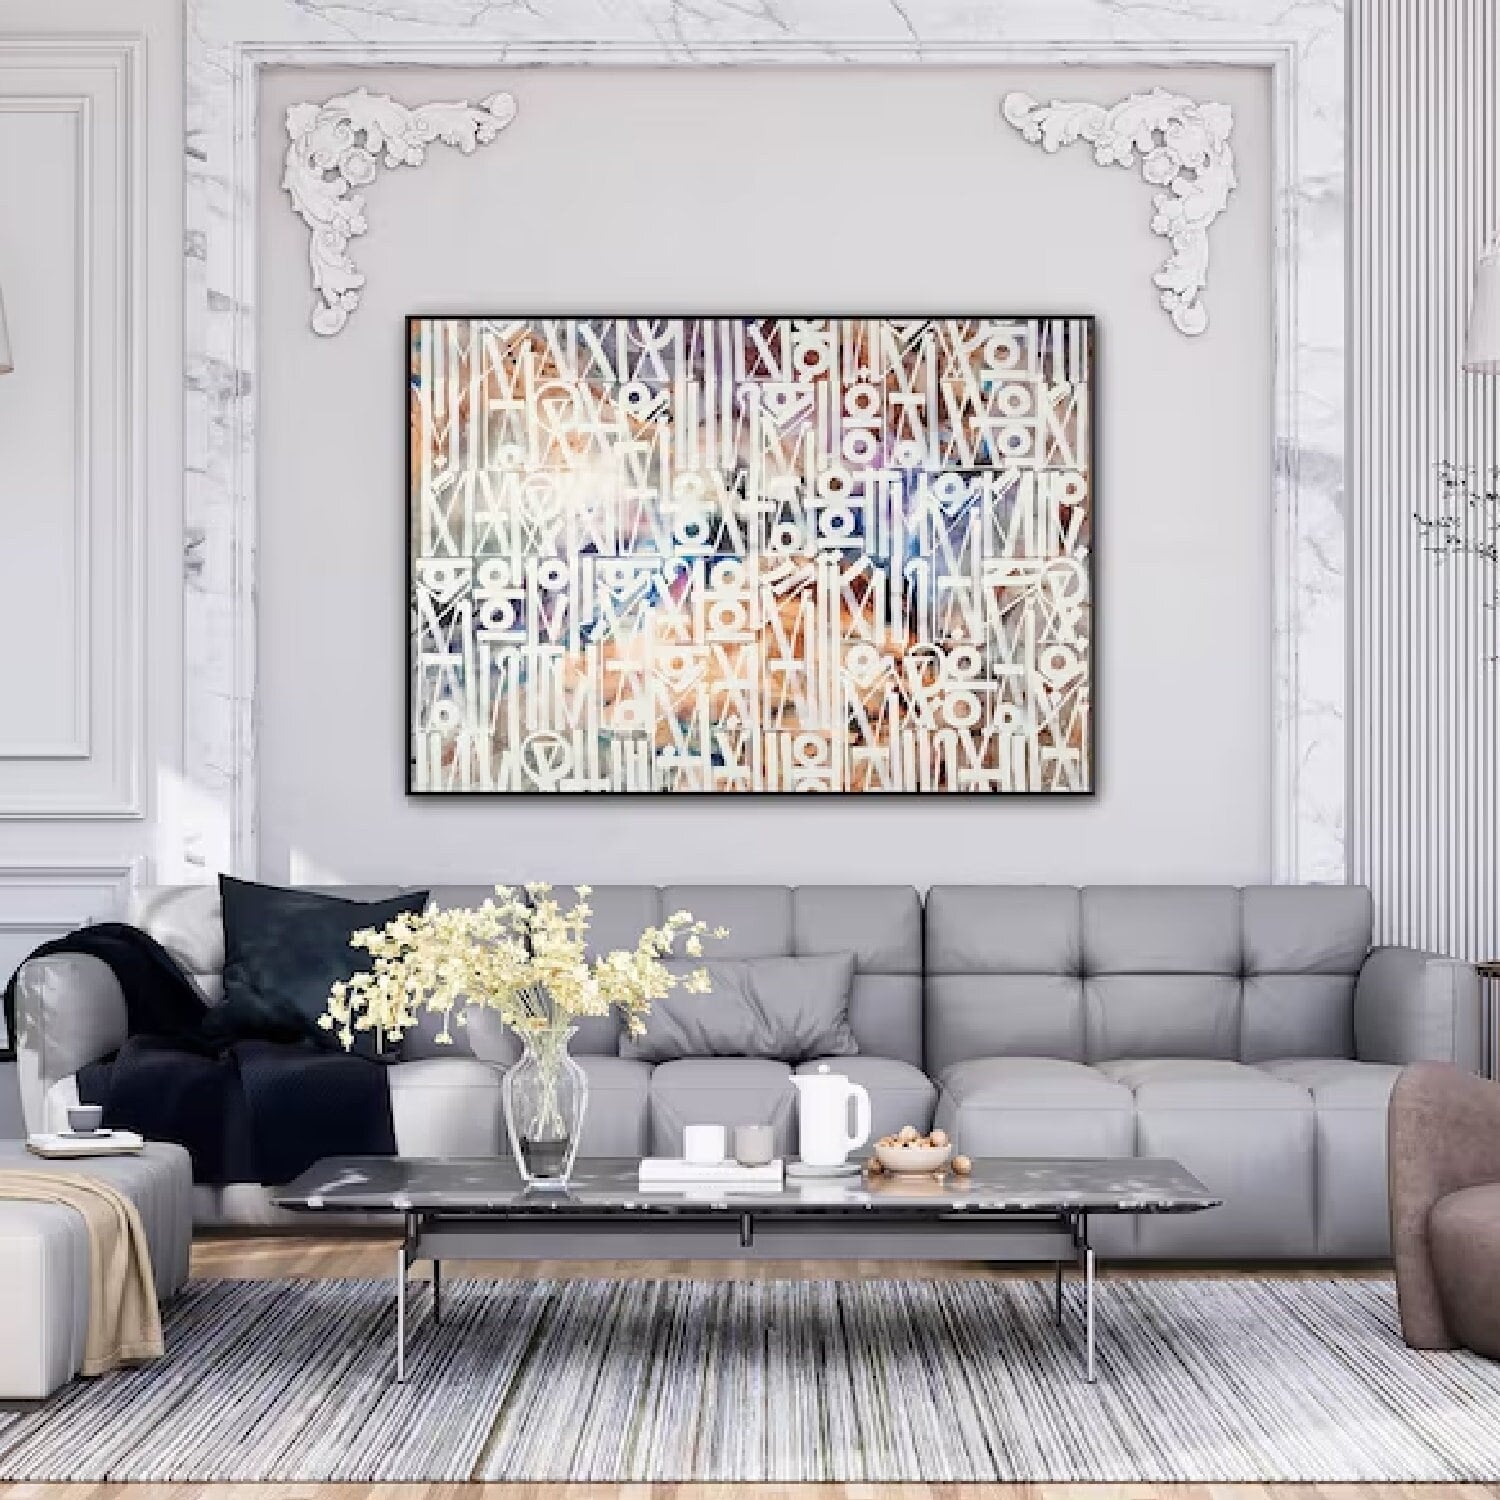 Retna-Inspired Calligraphy Abstract Replica Painting